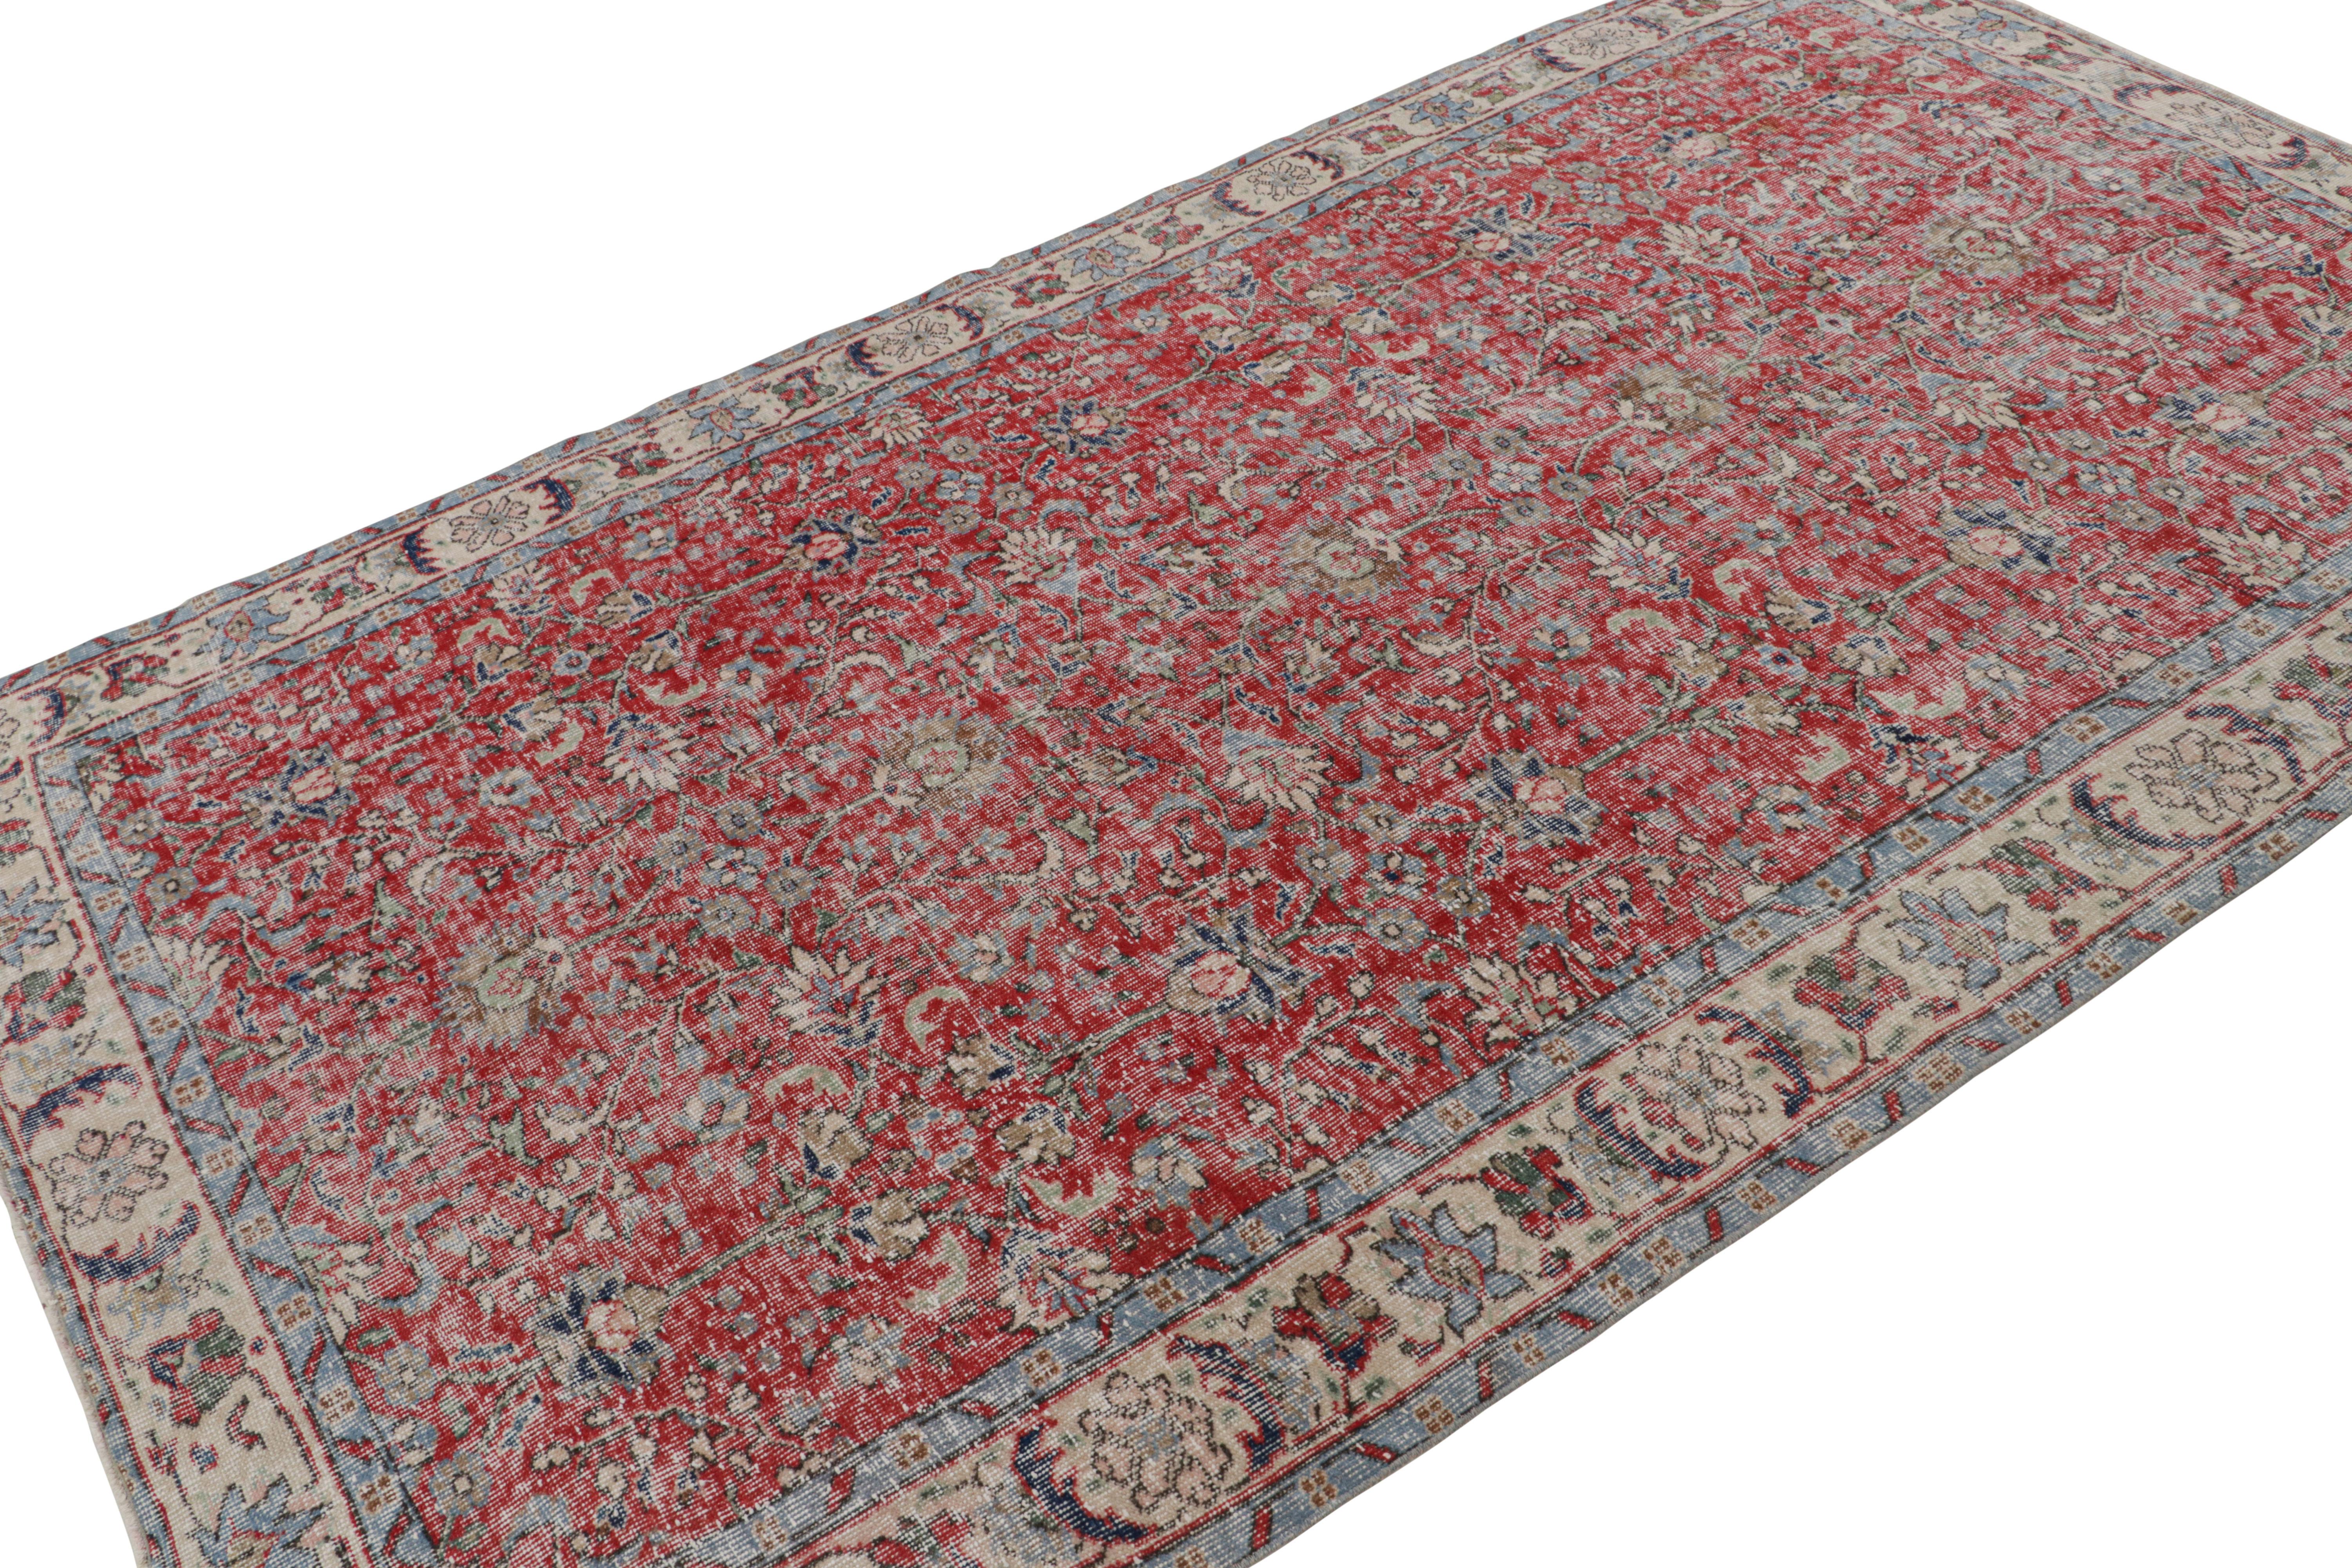 Hand-knotted in wool circa 1960-1970, this 6x9 vintage rug from Turkey is believed to be among the rare works of mid-century artist Zeki Müren.

On the Design:

Connoisseurs will admire this among the works believed to hail from this artist that